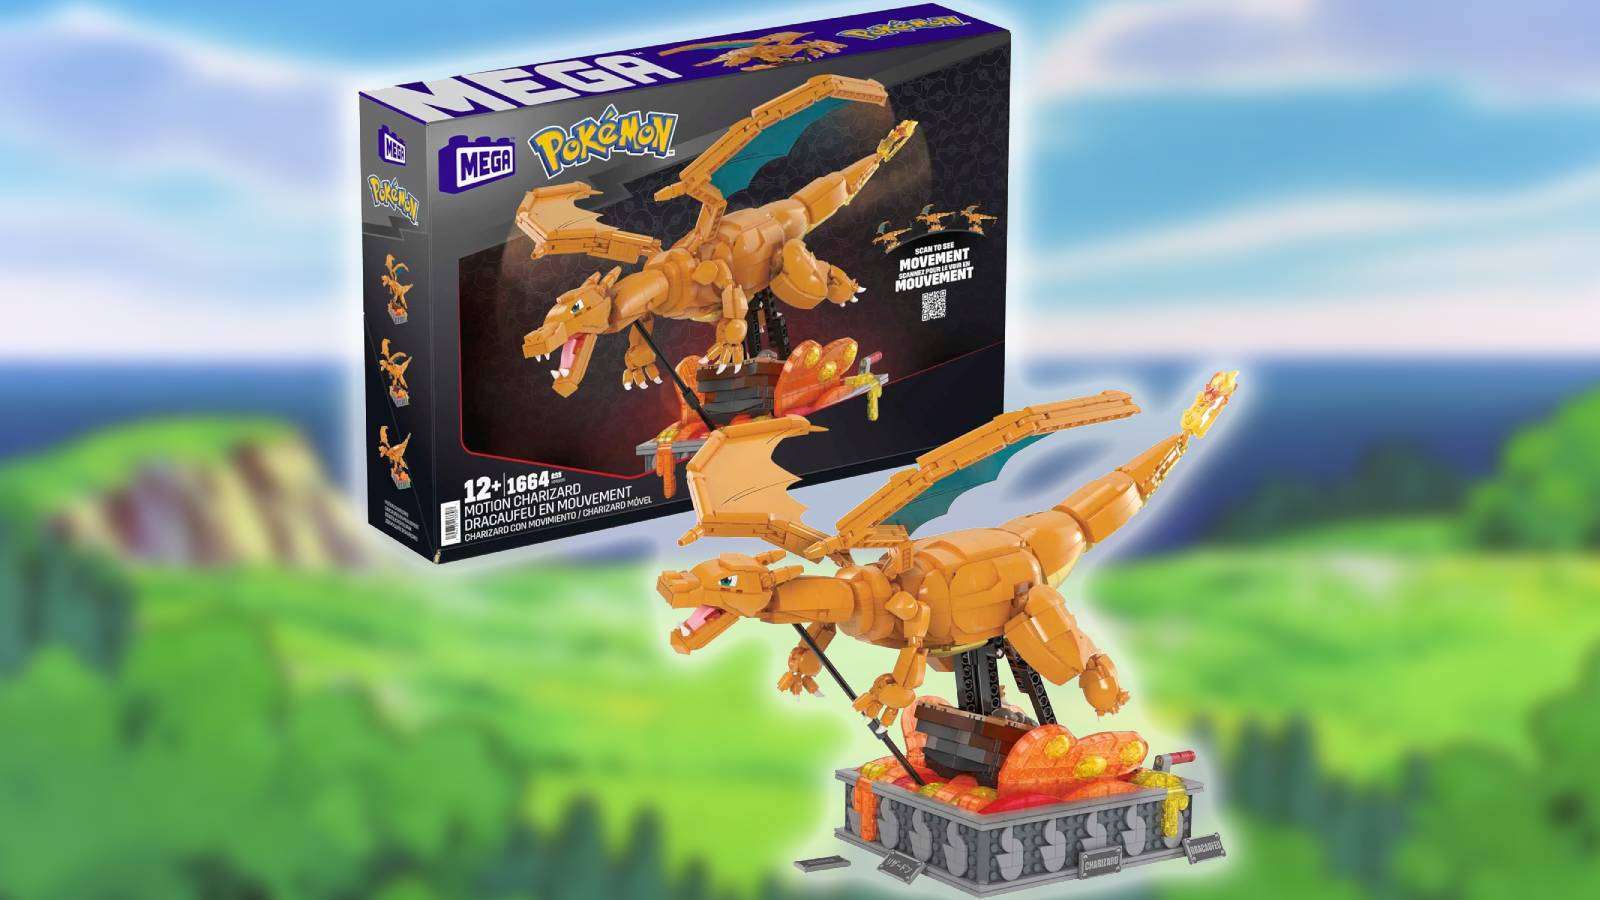 A block-based figure of Charizard is visible alongside the box